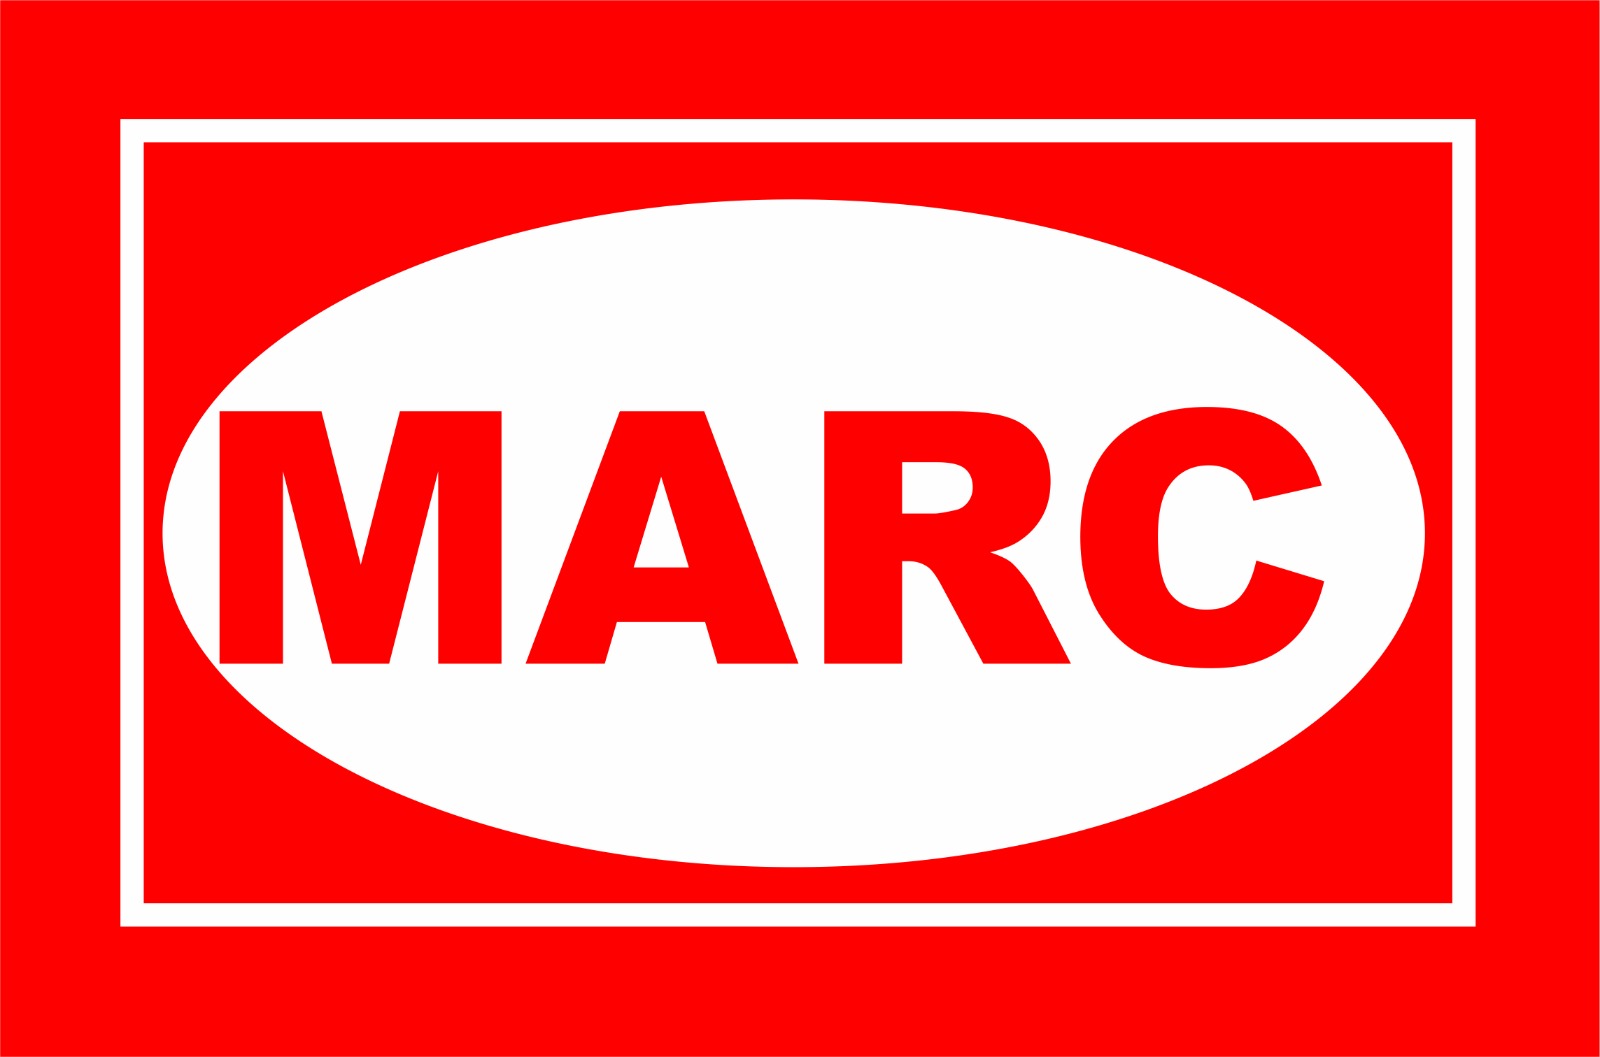 Marc Labs